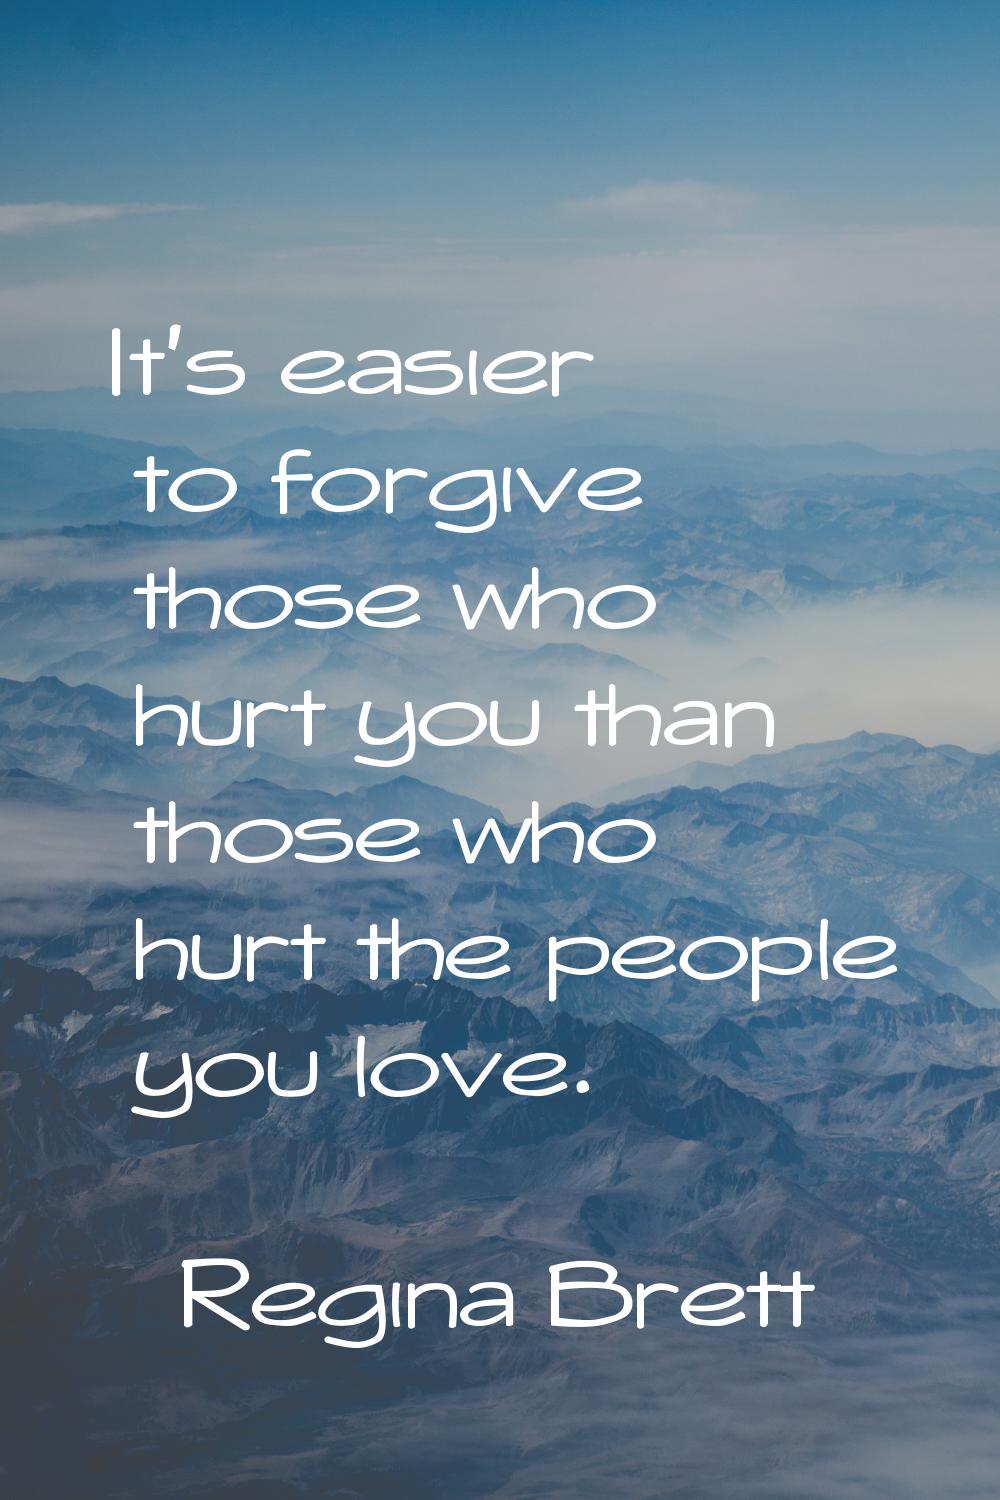 It's easier to forgive those who hurt you than those who hurt the people you love.